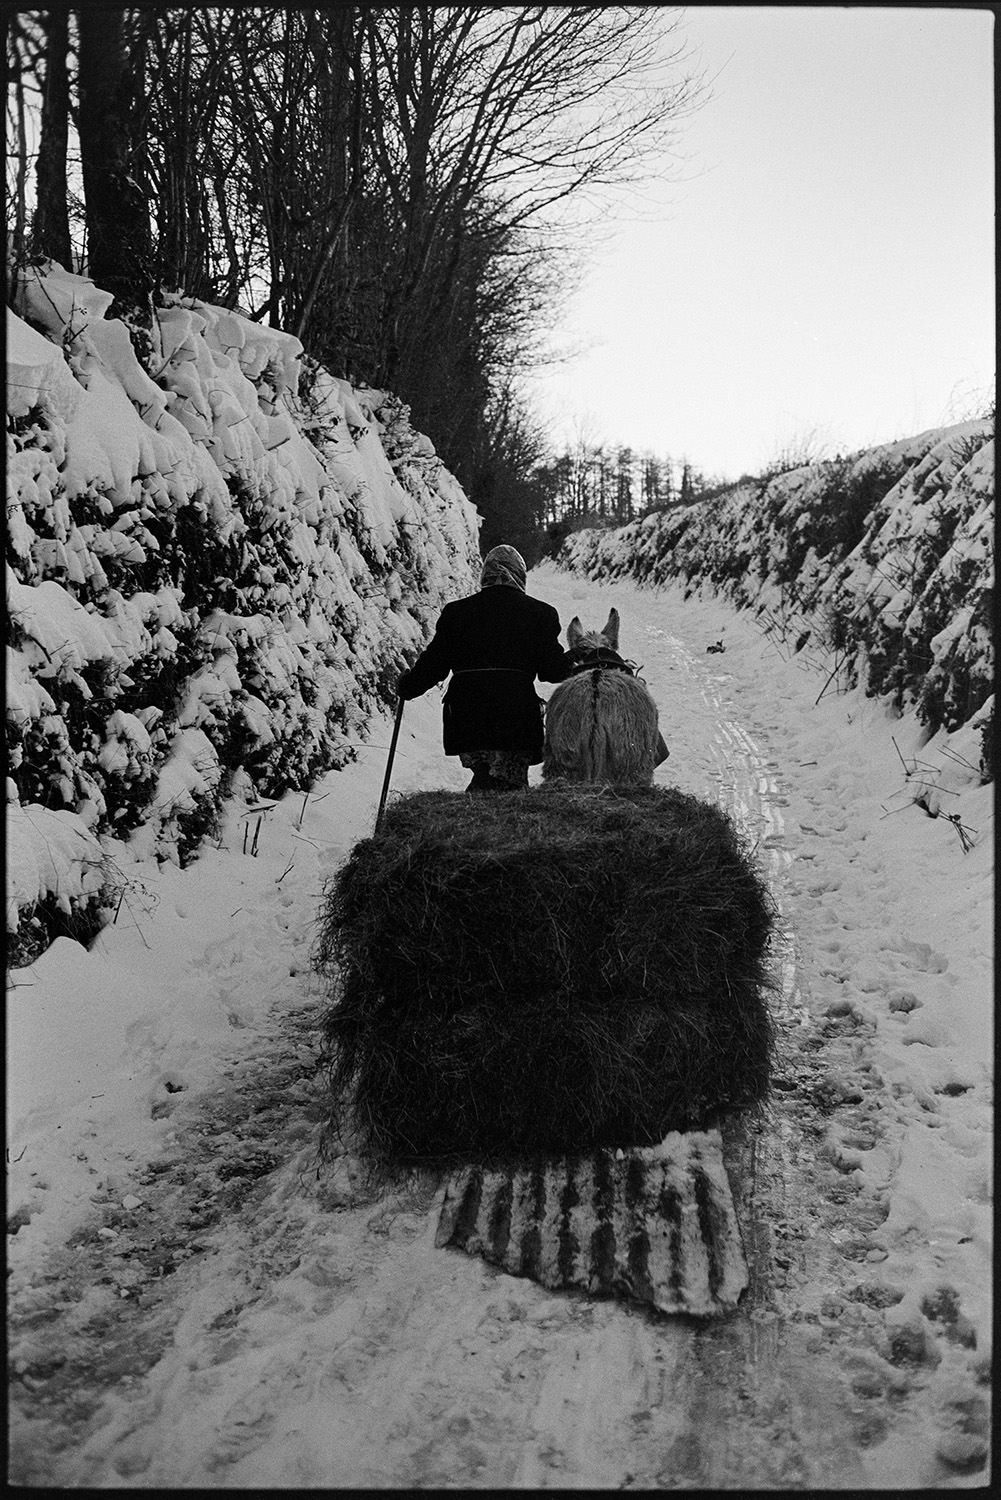 Snow, woman with donkey pulling hay on sledge and feeding sheep in field. 
[Jo Curzon leading a donkey pulling a sledge made from a sheet of corrugated iron with bales of hay, along a snow covered lane at Millhams, Dolton. They are taking the hay to feed sheep.]